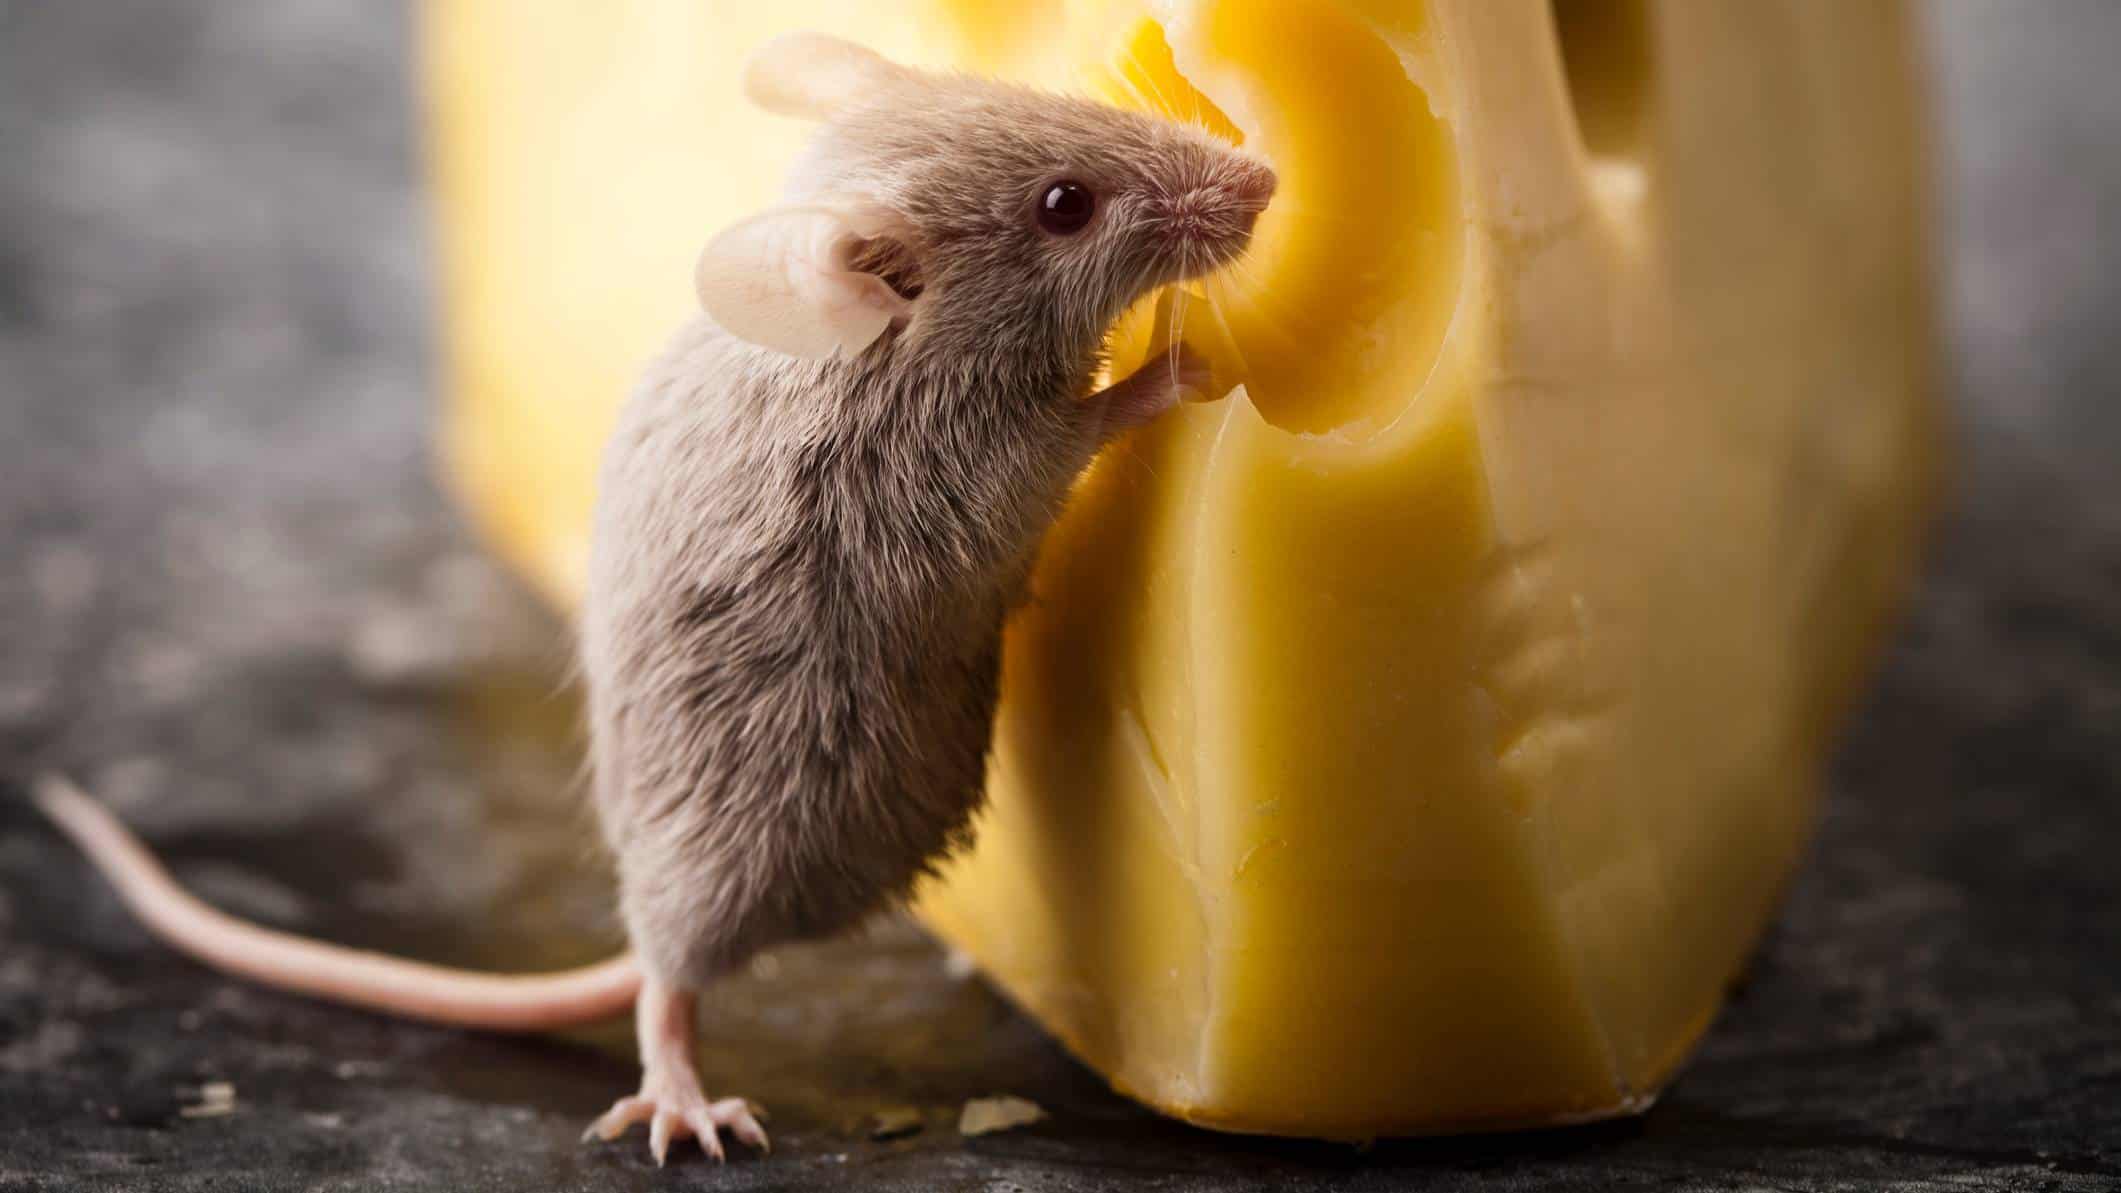 A cute tiny mouse nibbling on a block of cheese symbolising the falling Bega Cheese share price today